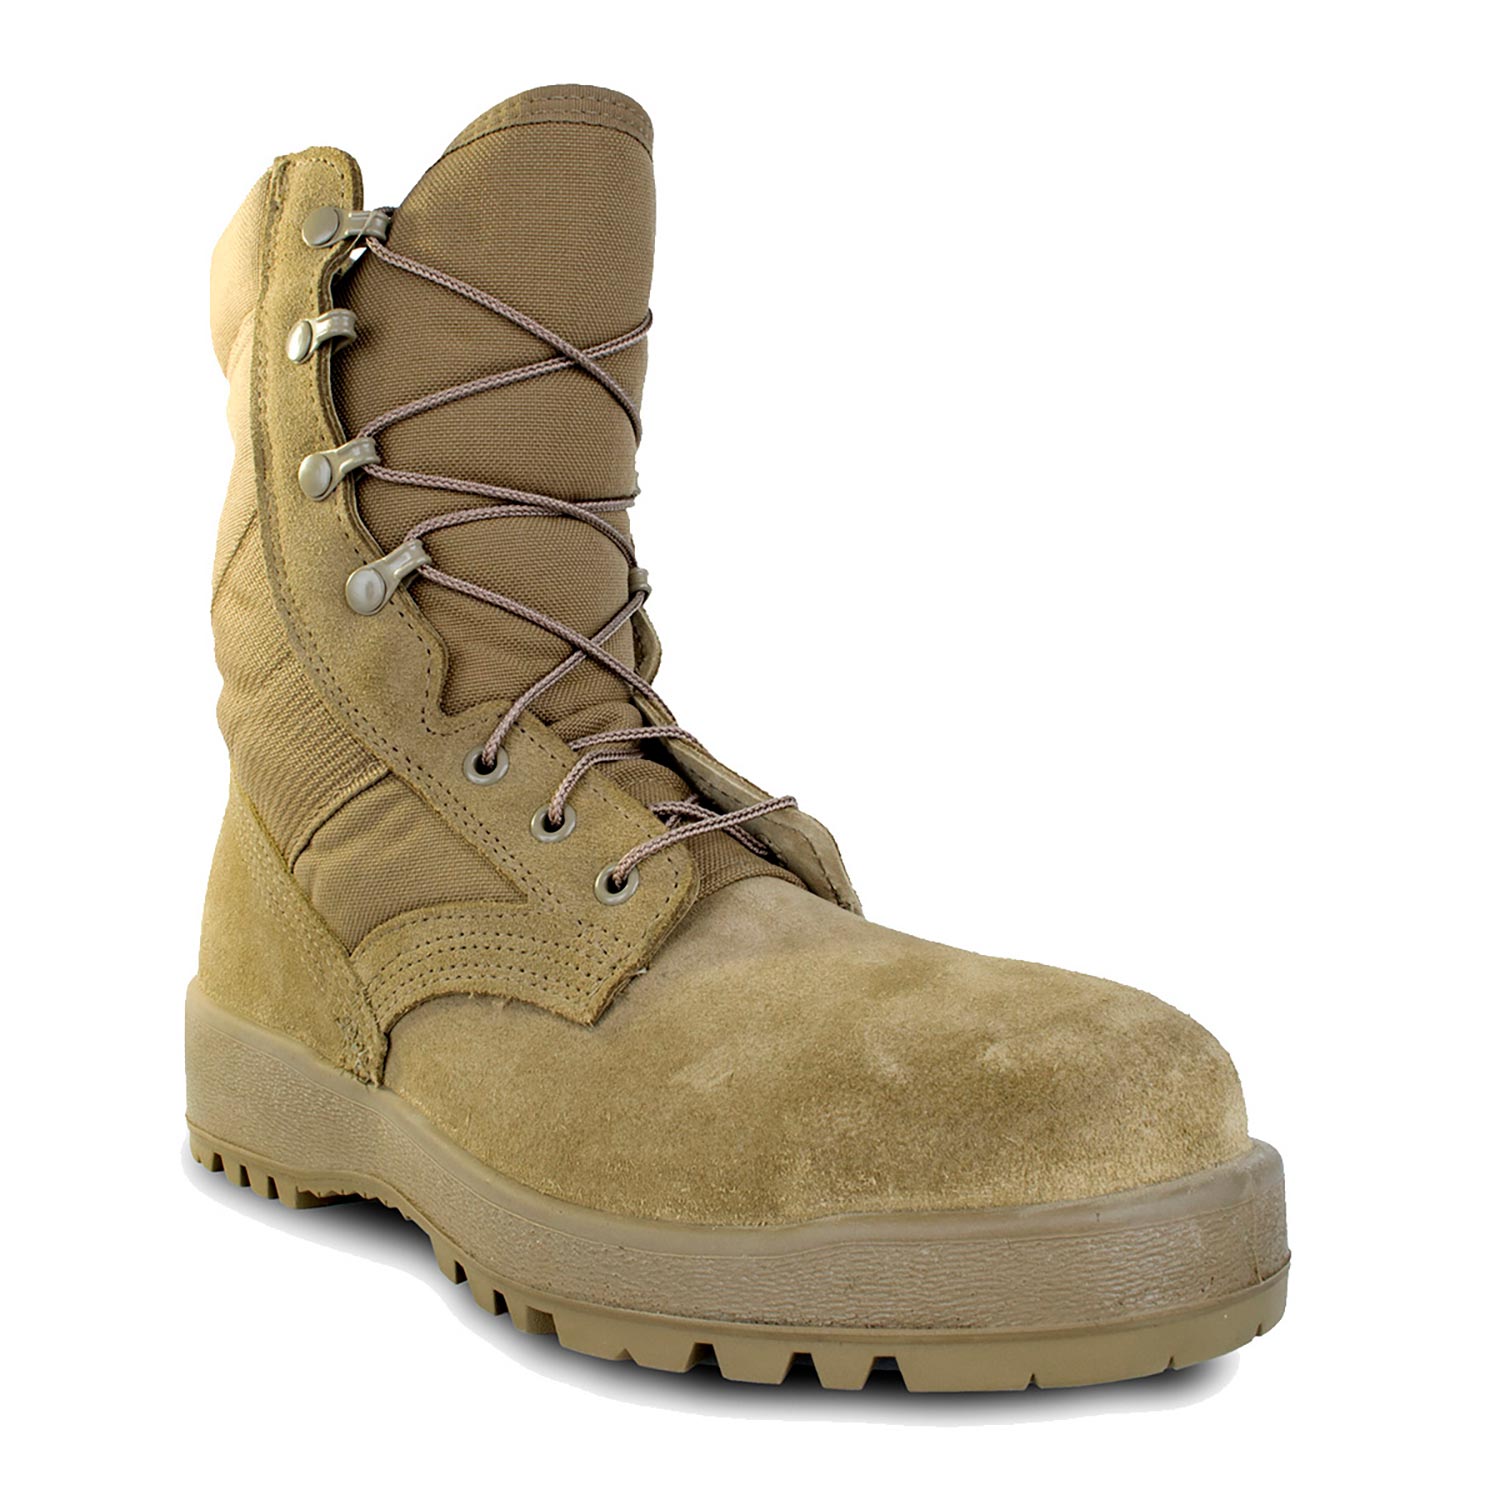 McRae Hot Weather Steel Toe Military Boots